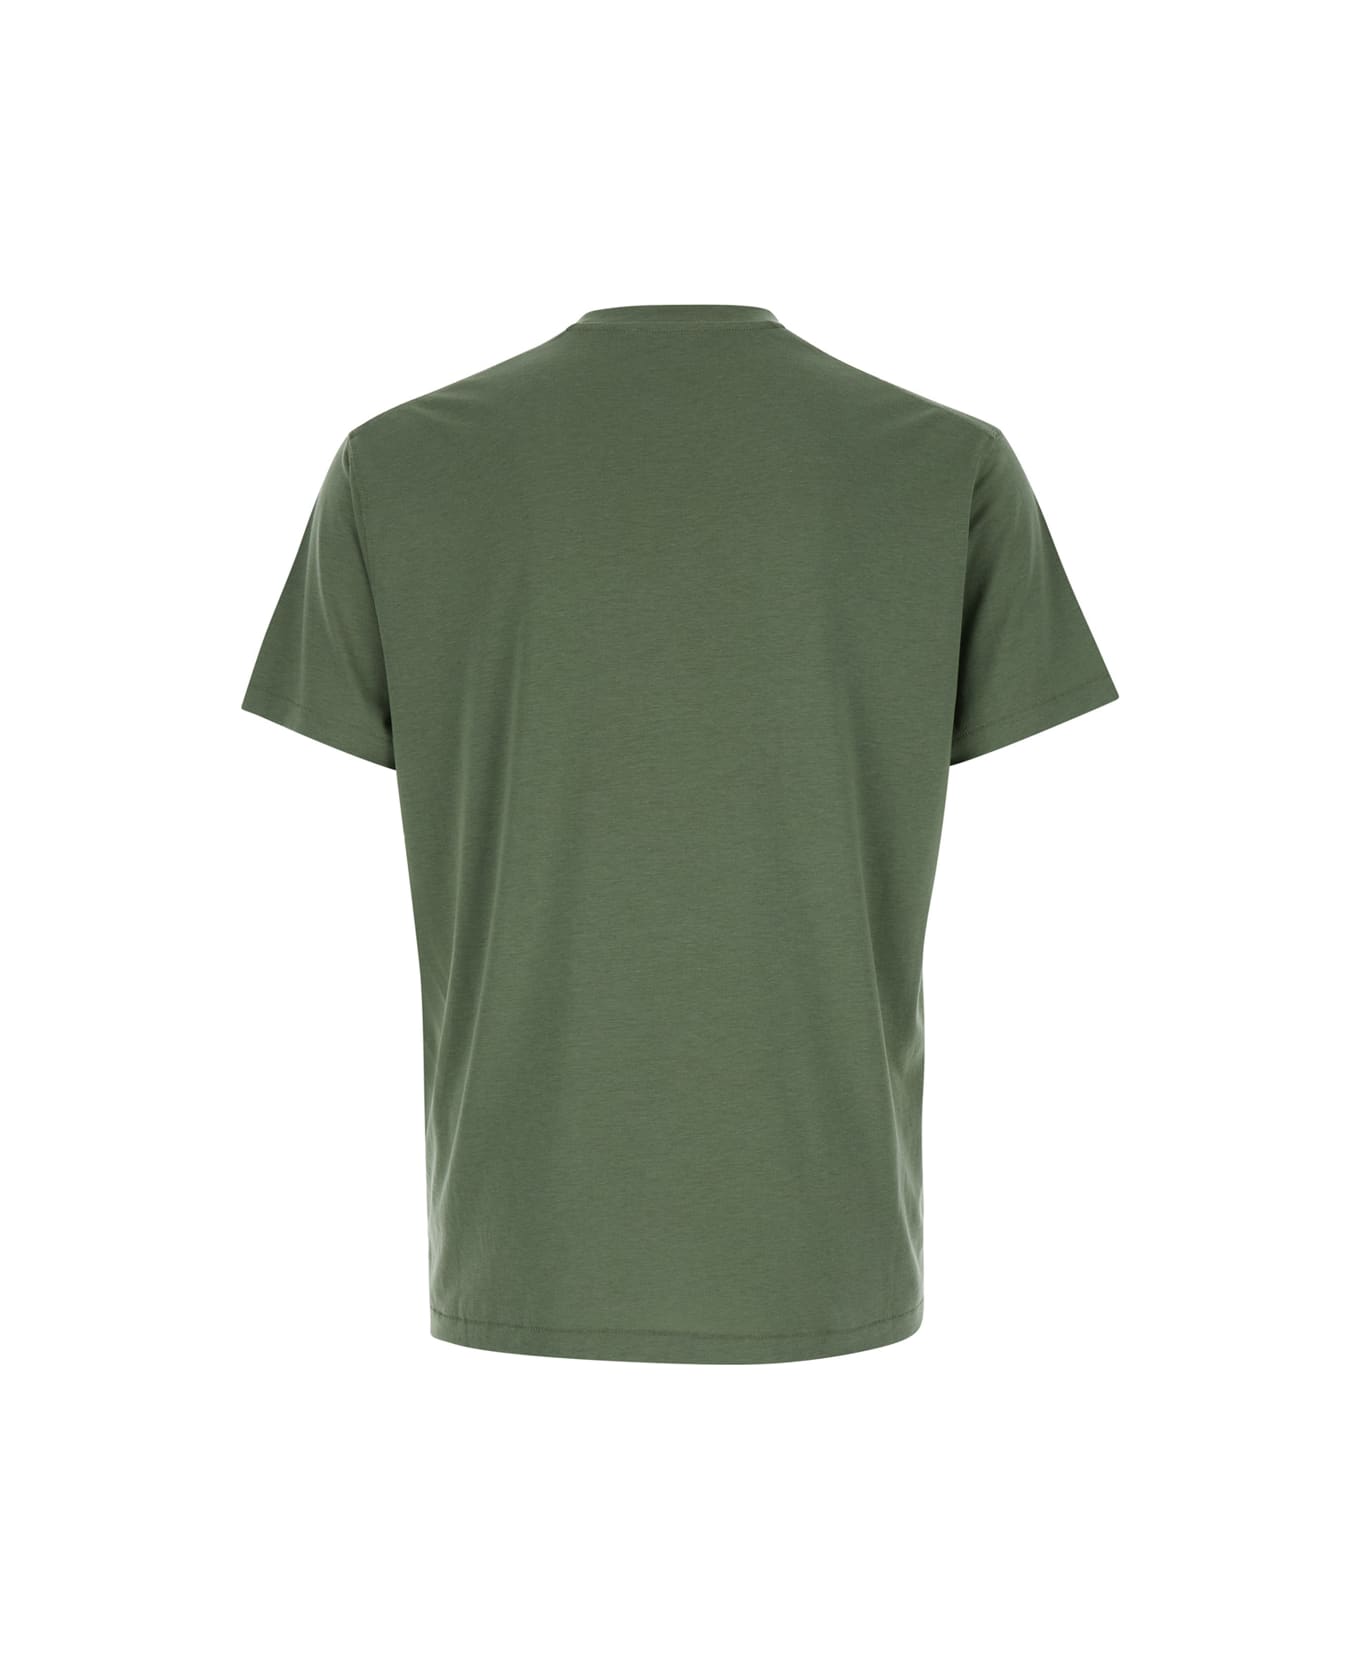 Tom Ford Green Crewneck T-shirt In Cotton Blend Man - Green シャツ